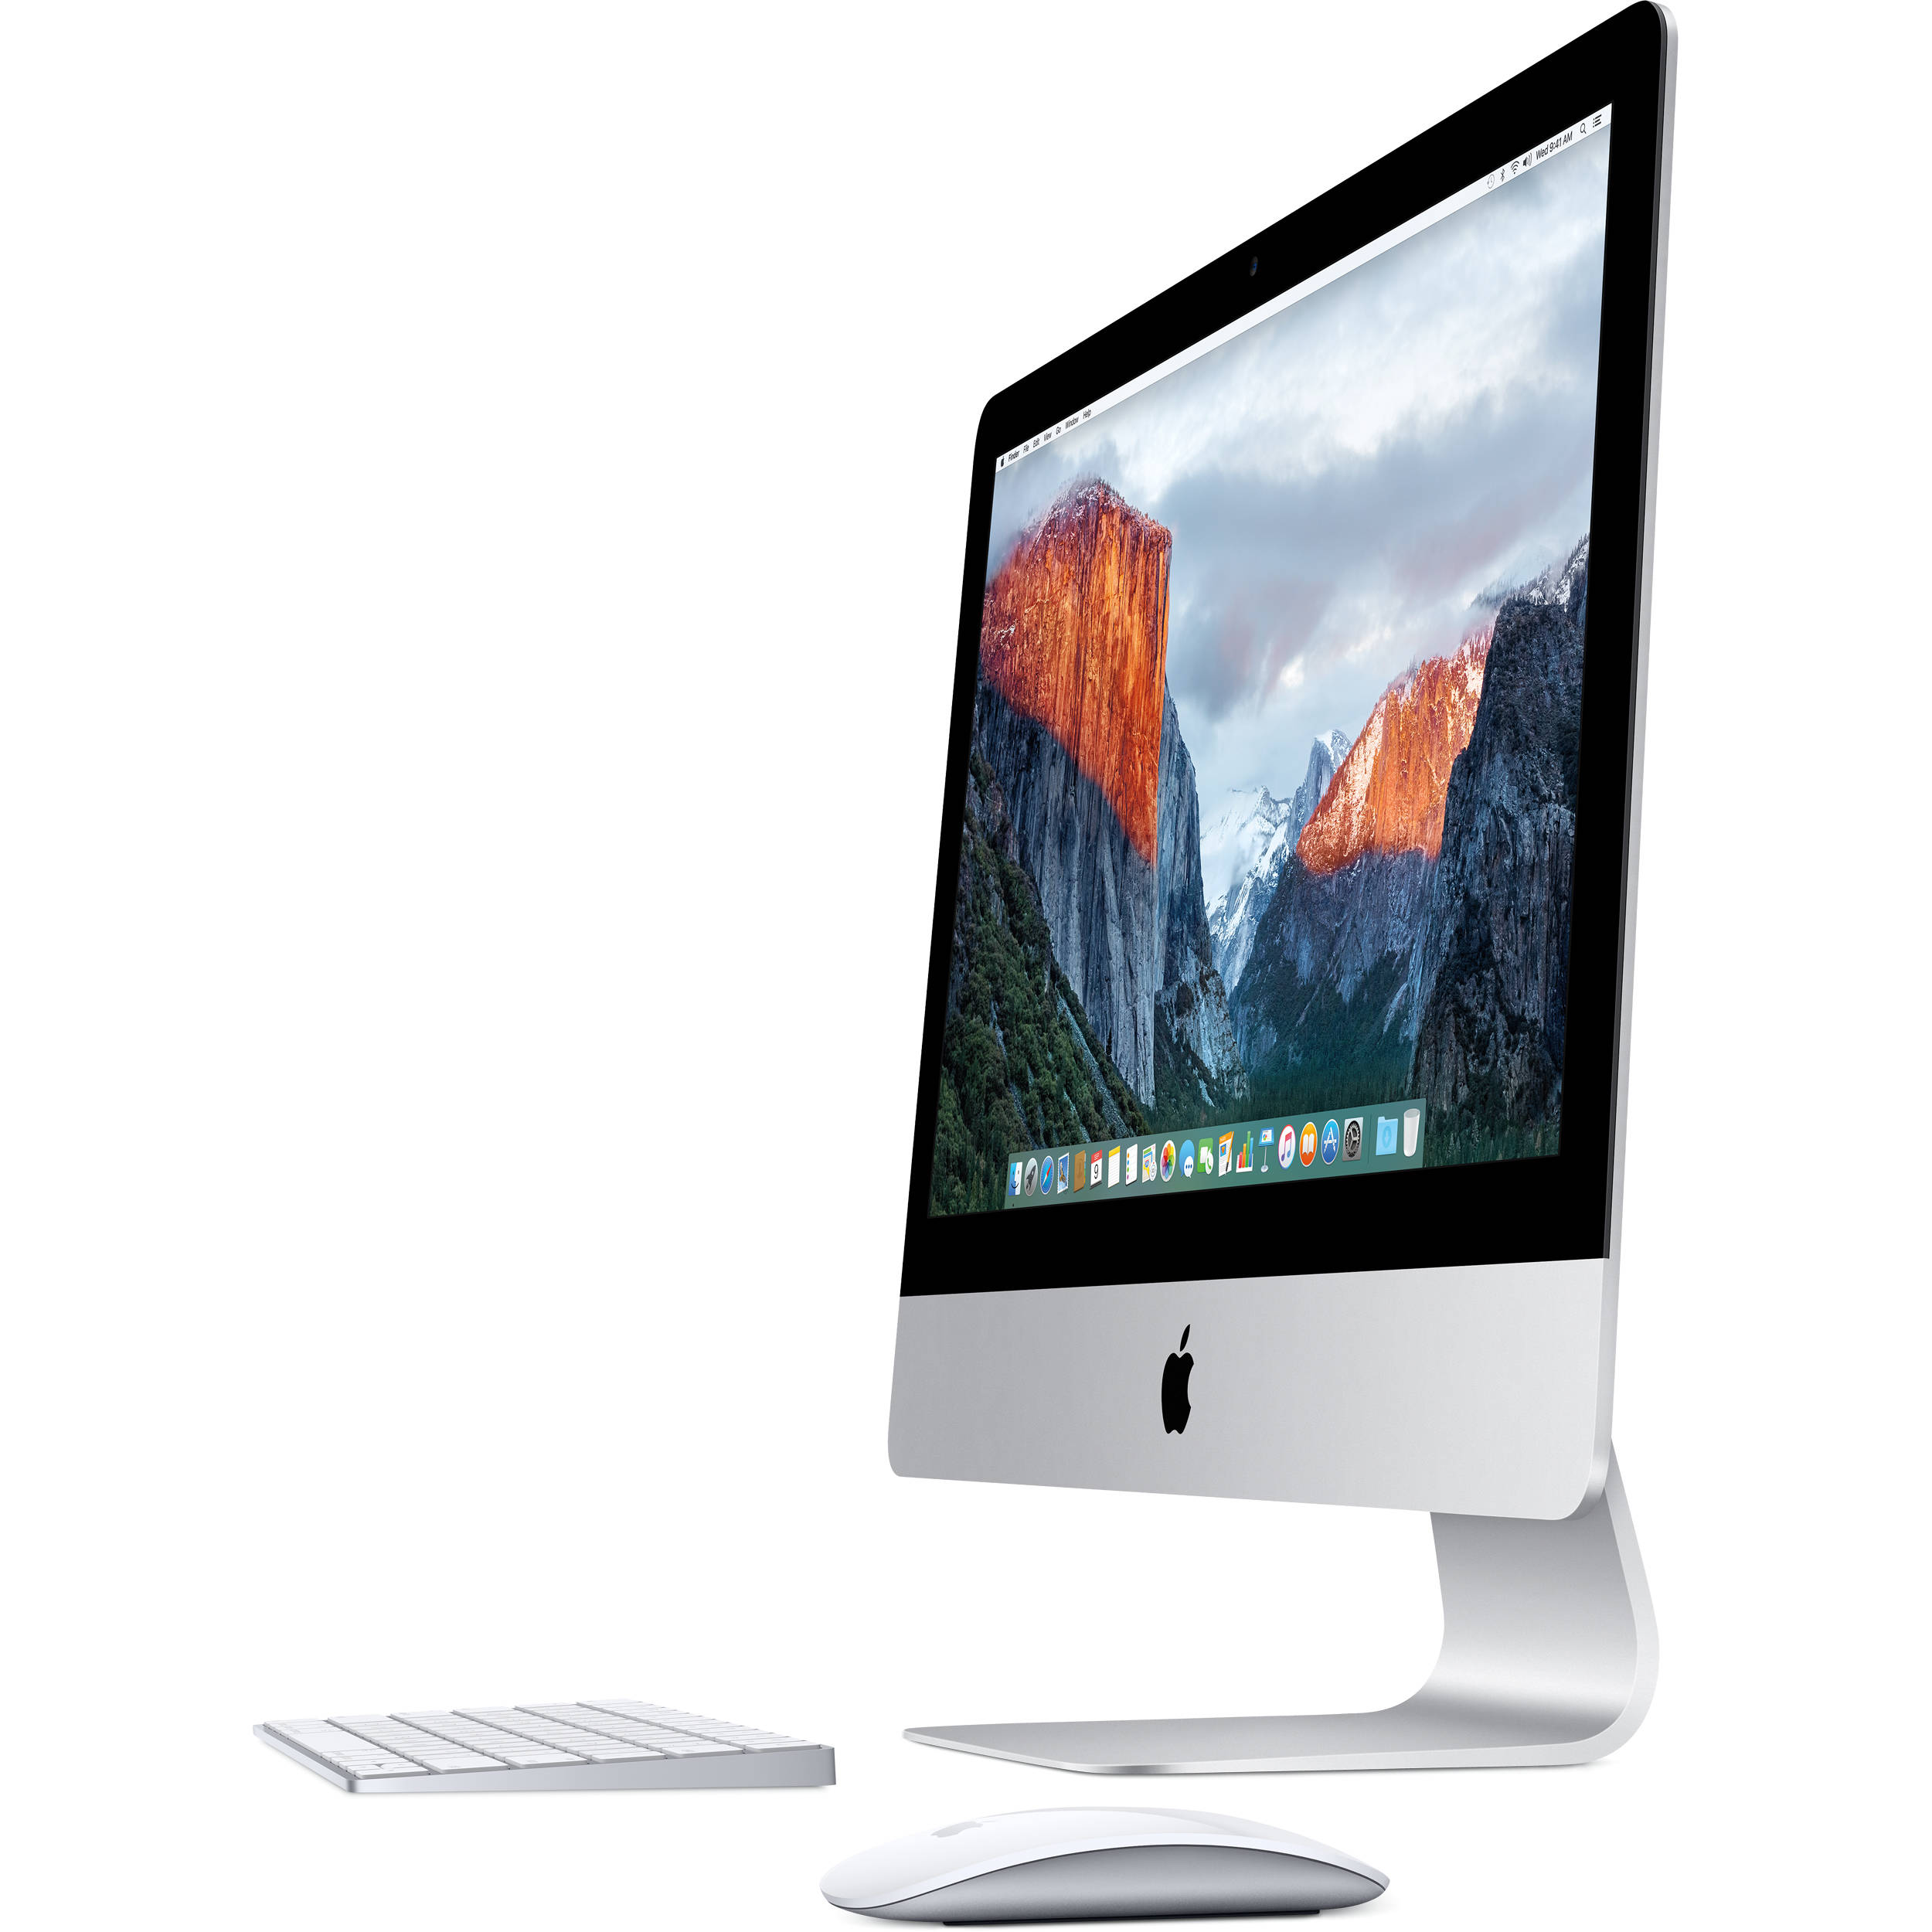 Imac core i5 for video editing 2015